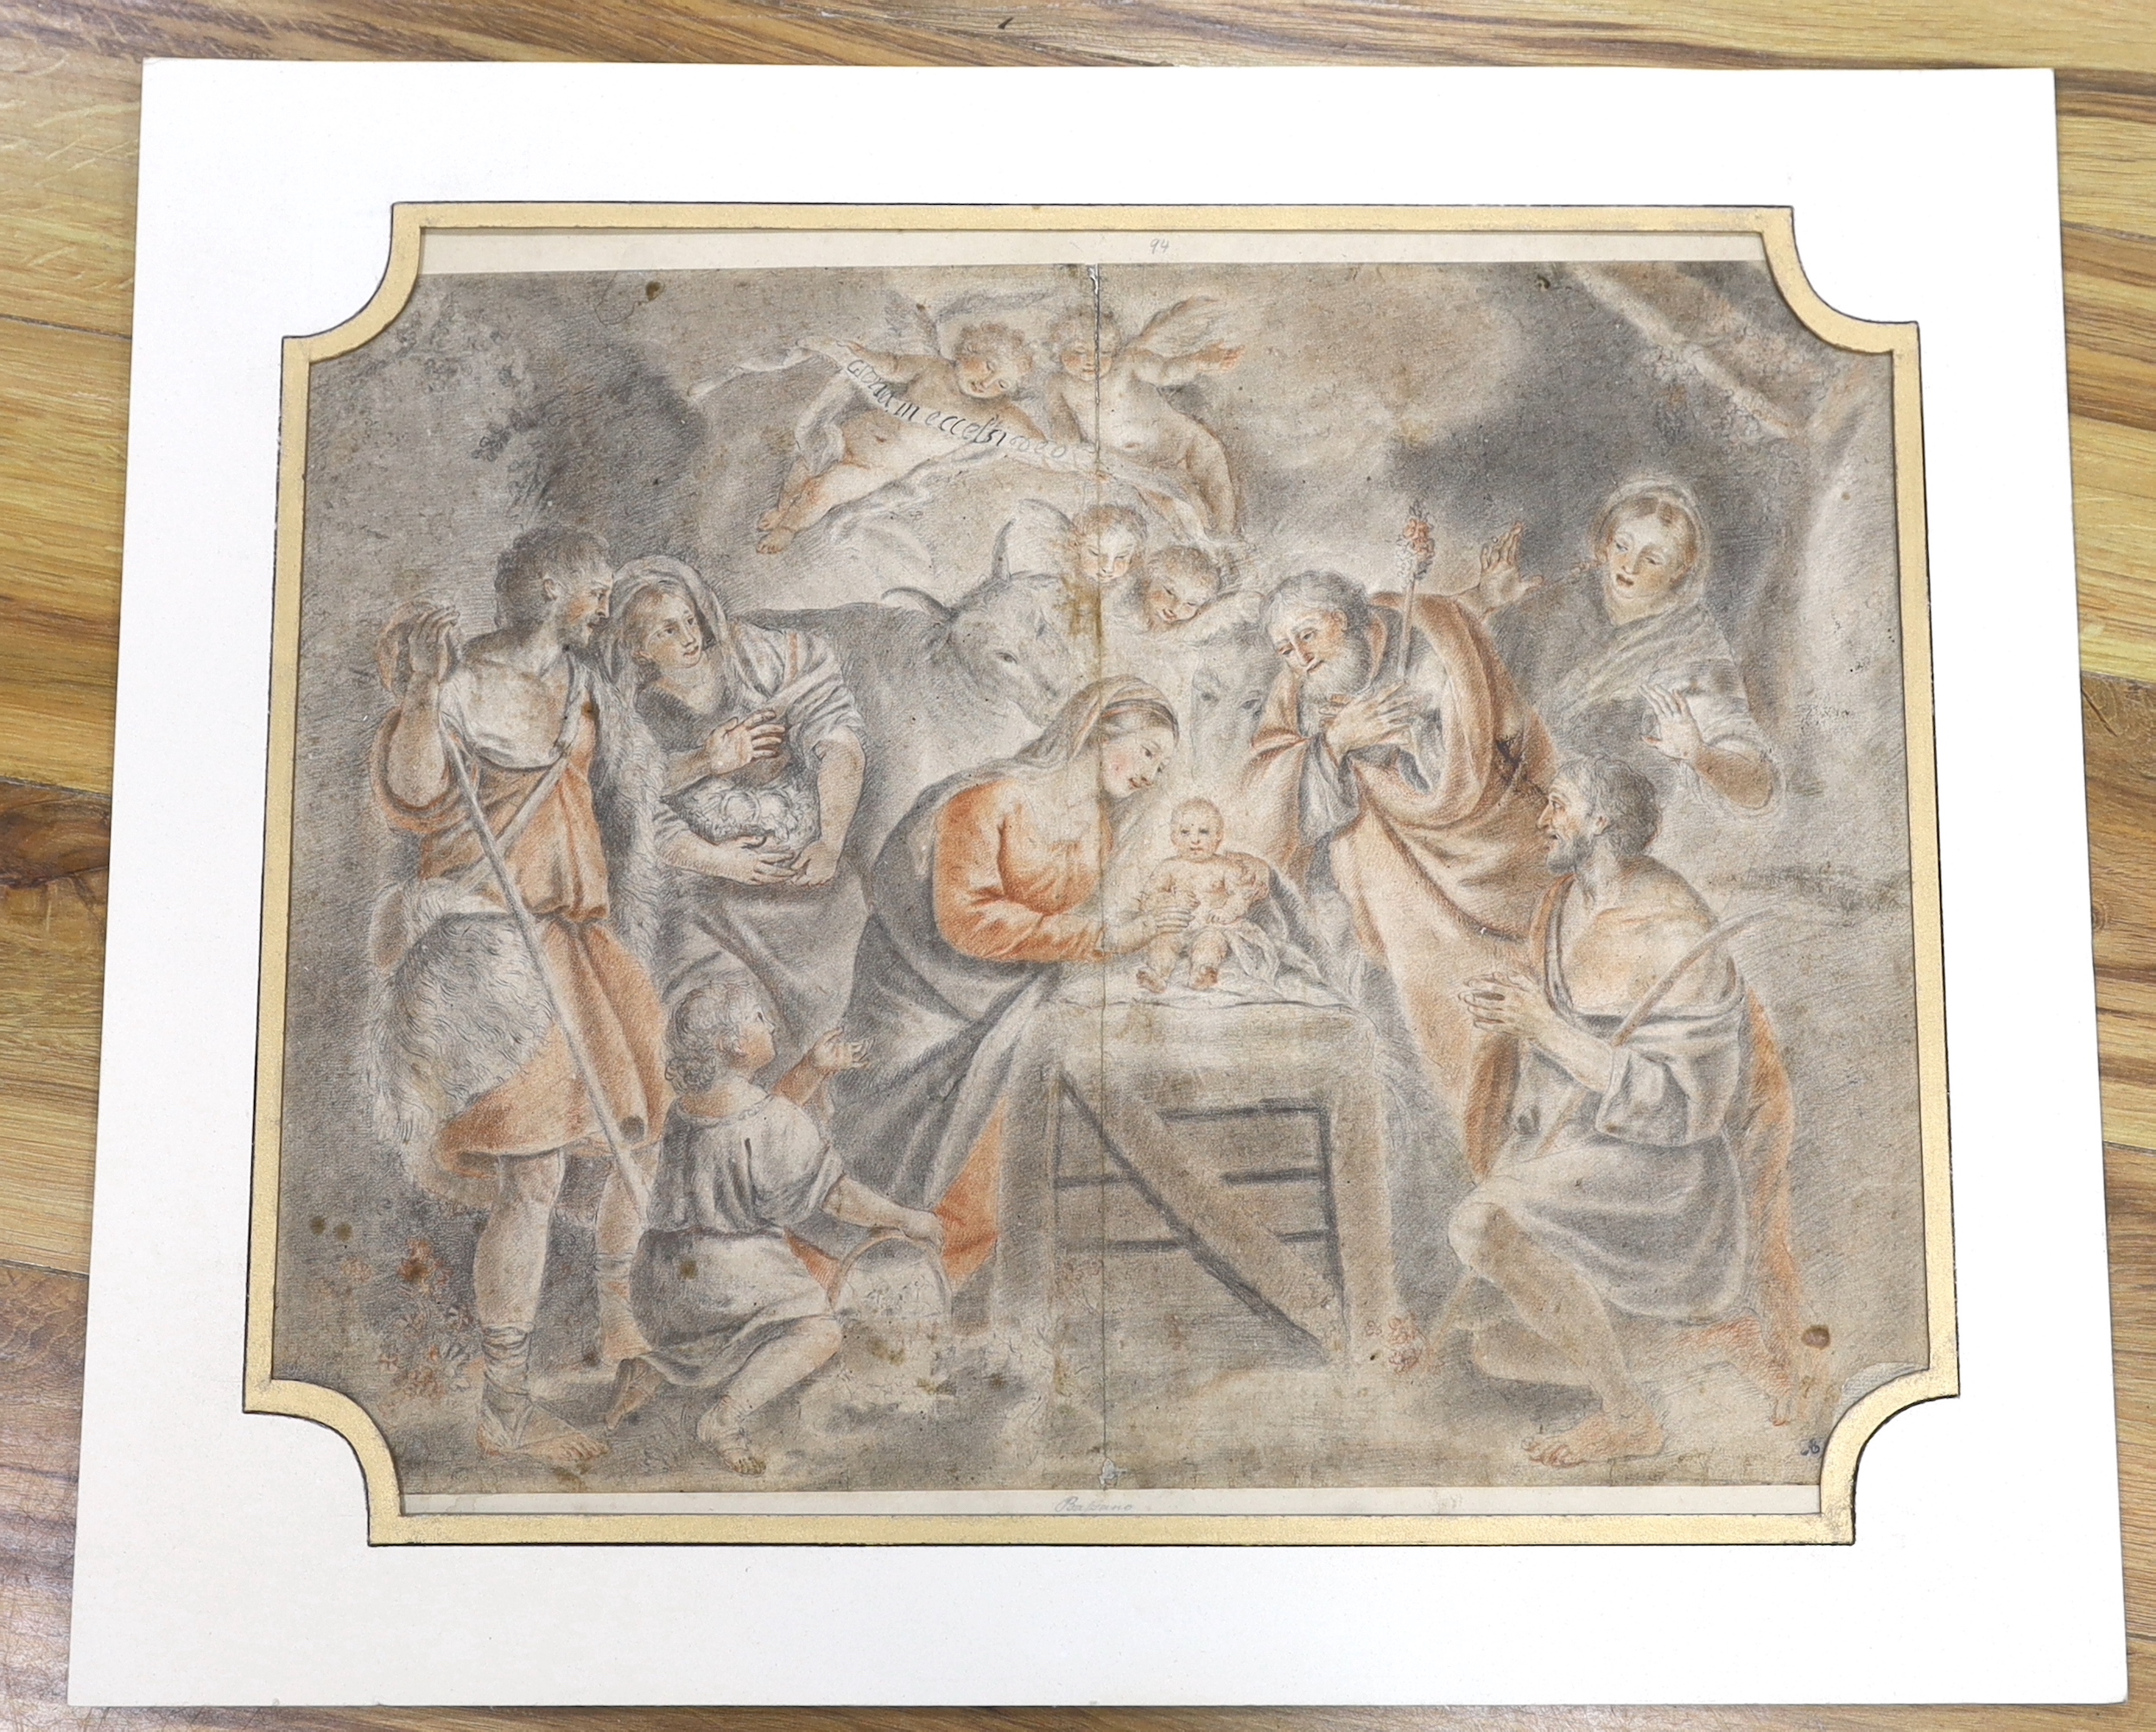 Manner of Jacopo Bassano (Italian, 1510-1592), old master, pencil and charcoal, ‘Nativity’, - Image 2 of 3